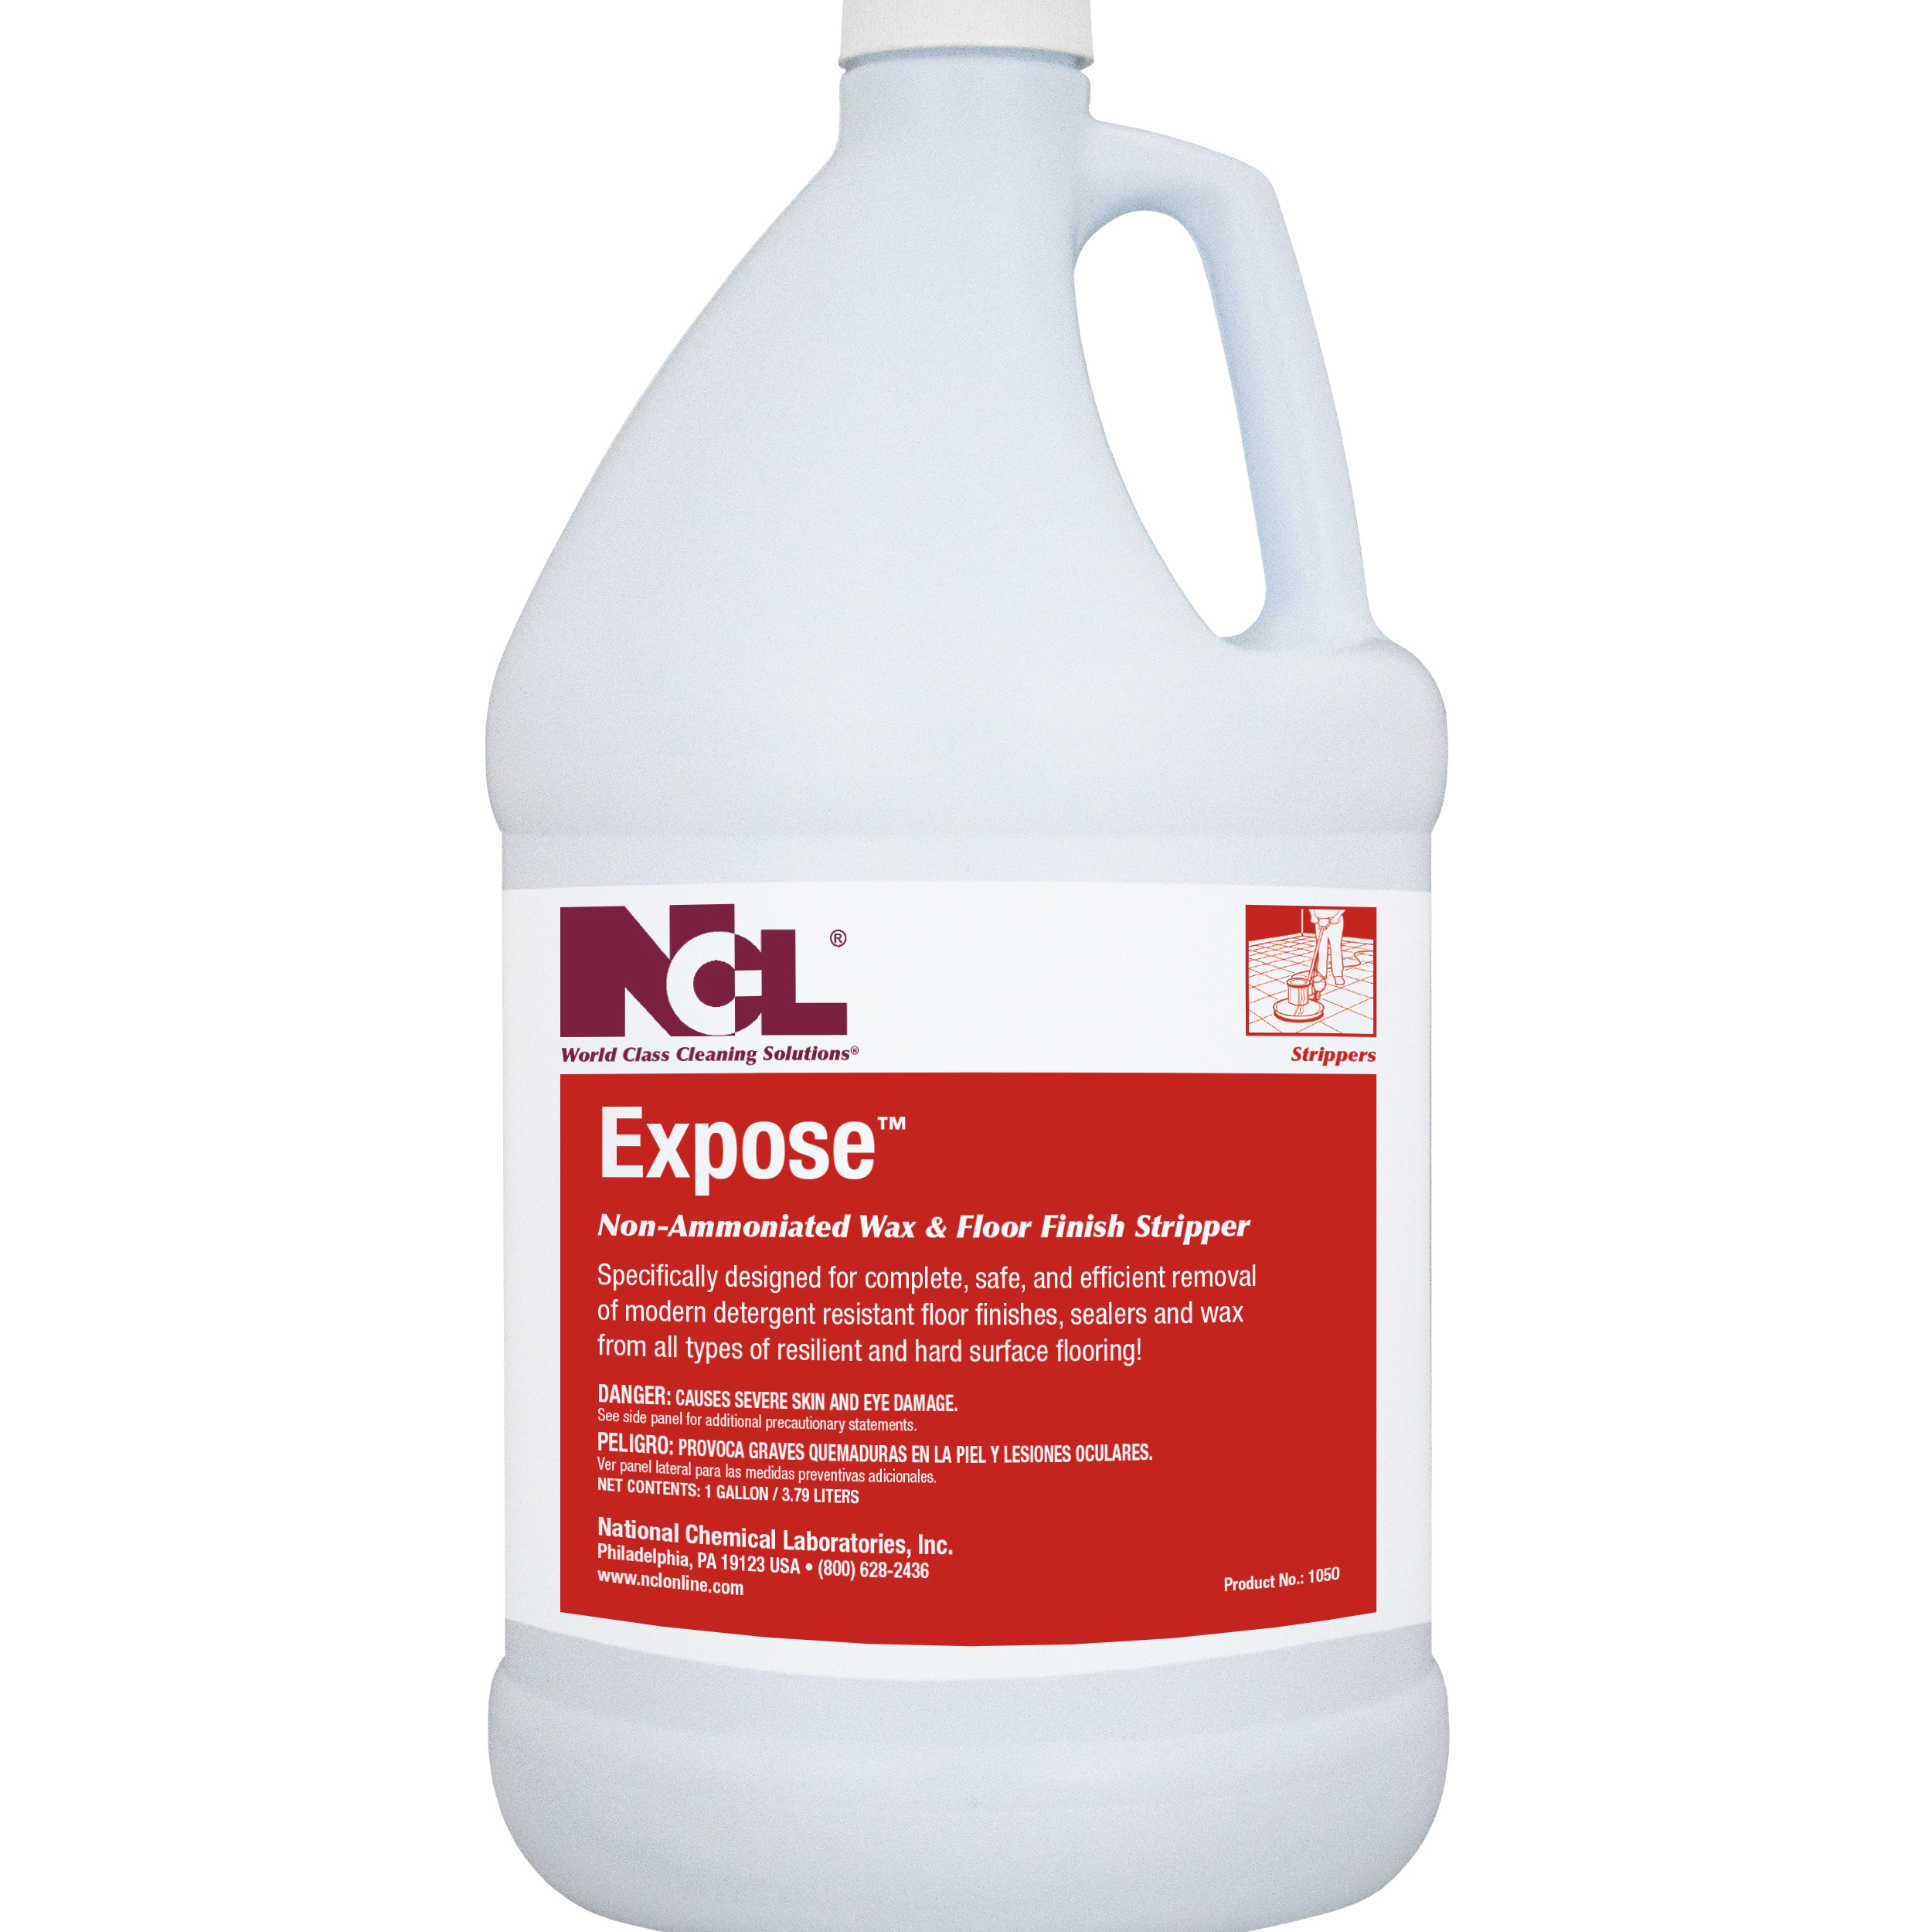  EXPOSE Non-Ammoniated Wax and Floor Finish Stripper 4/1 Gal. Case (NCL1050-29) 